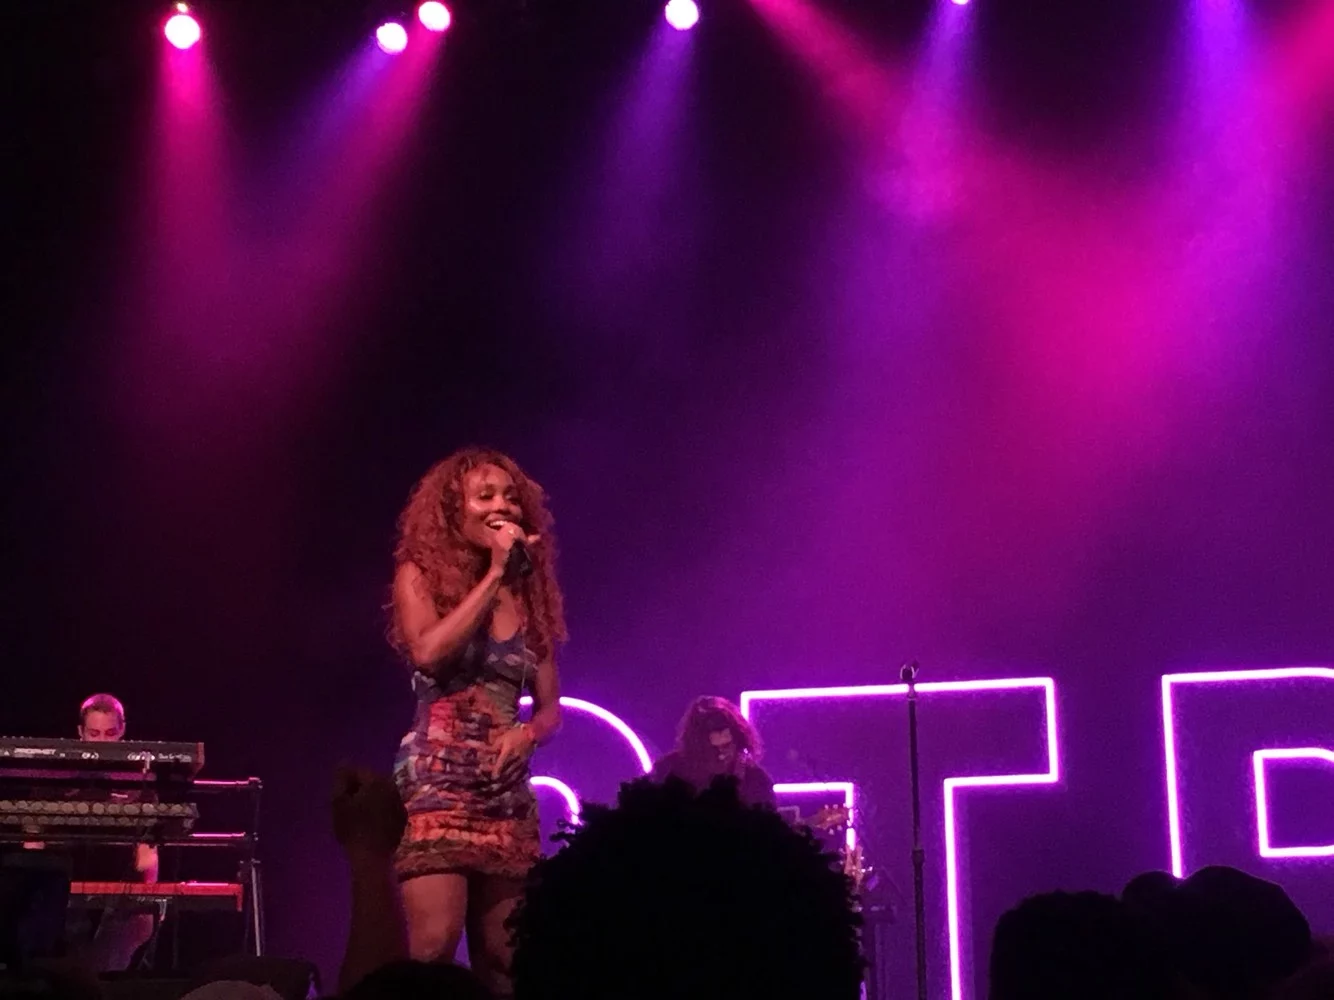 SZA shines at The Warfield Theatre